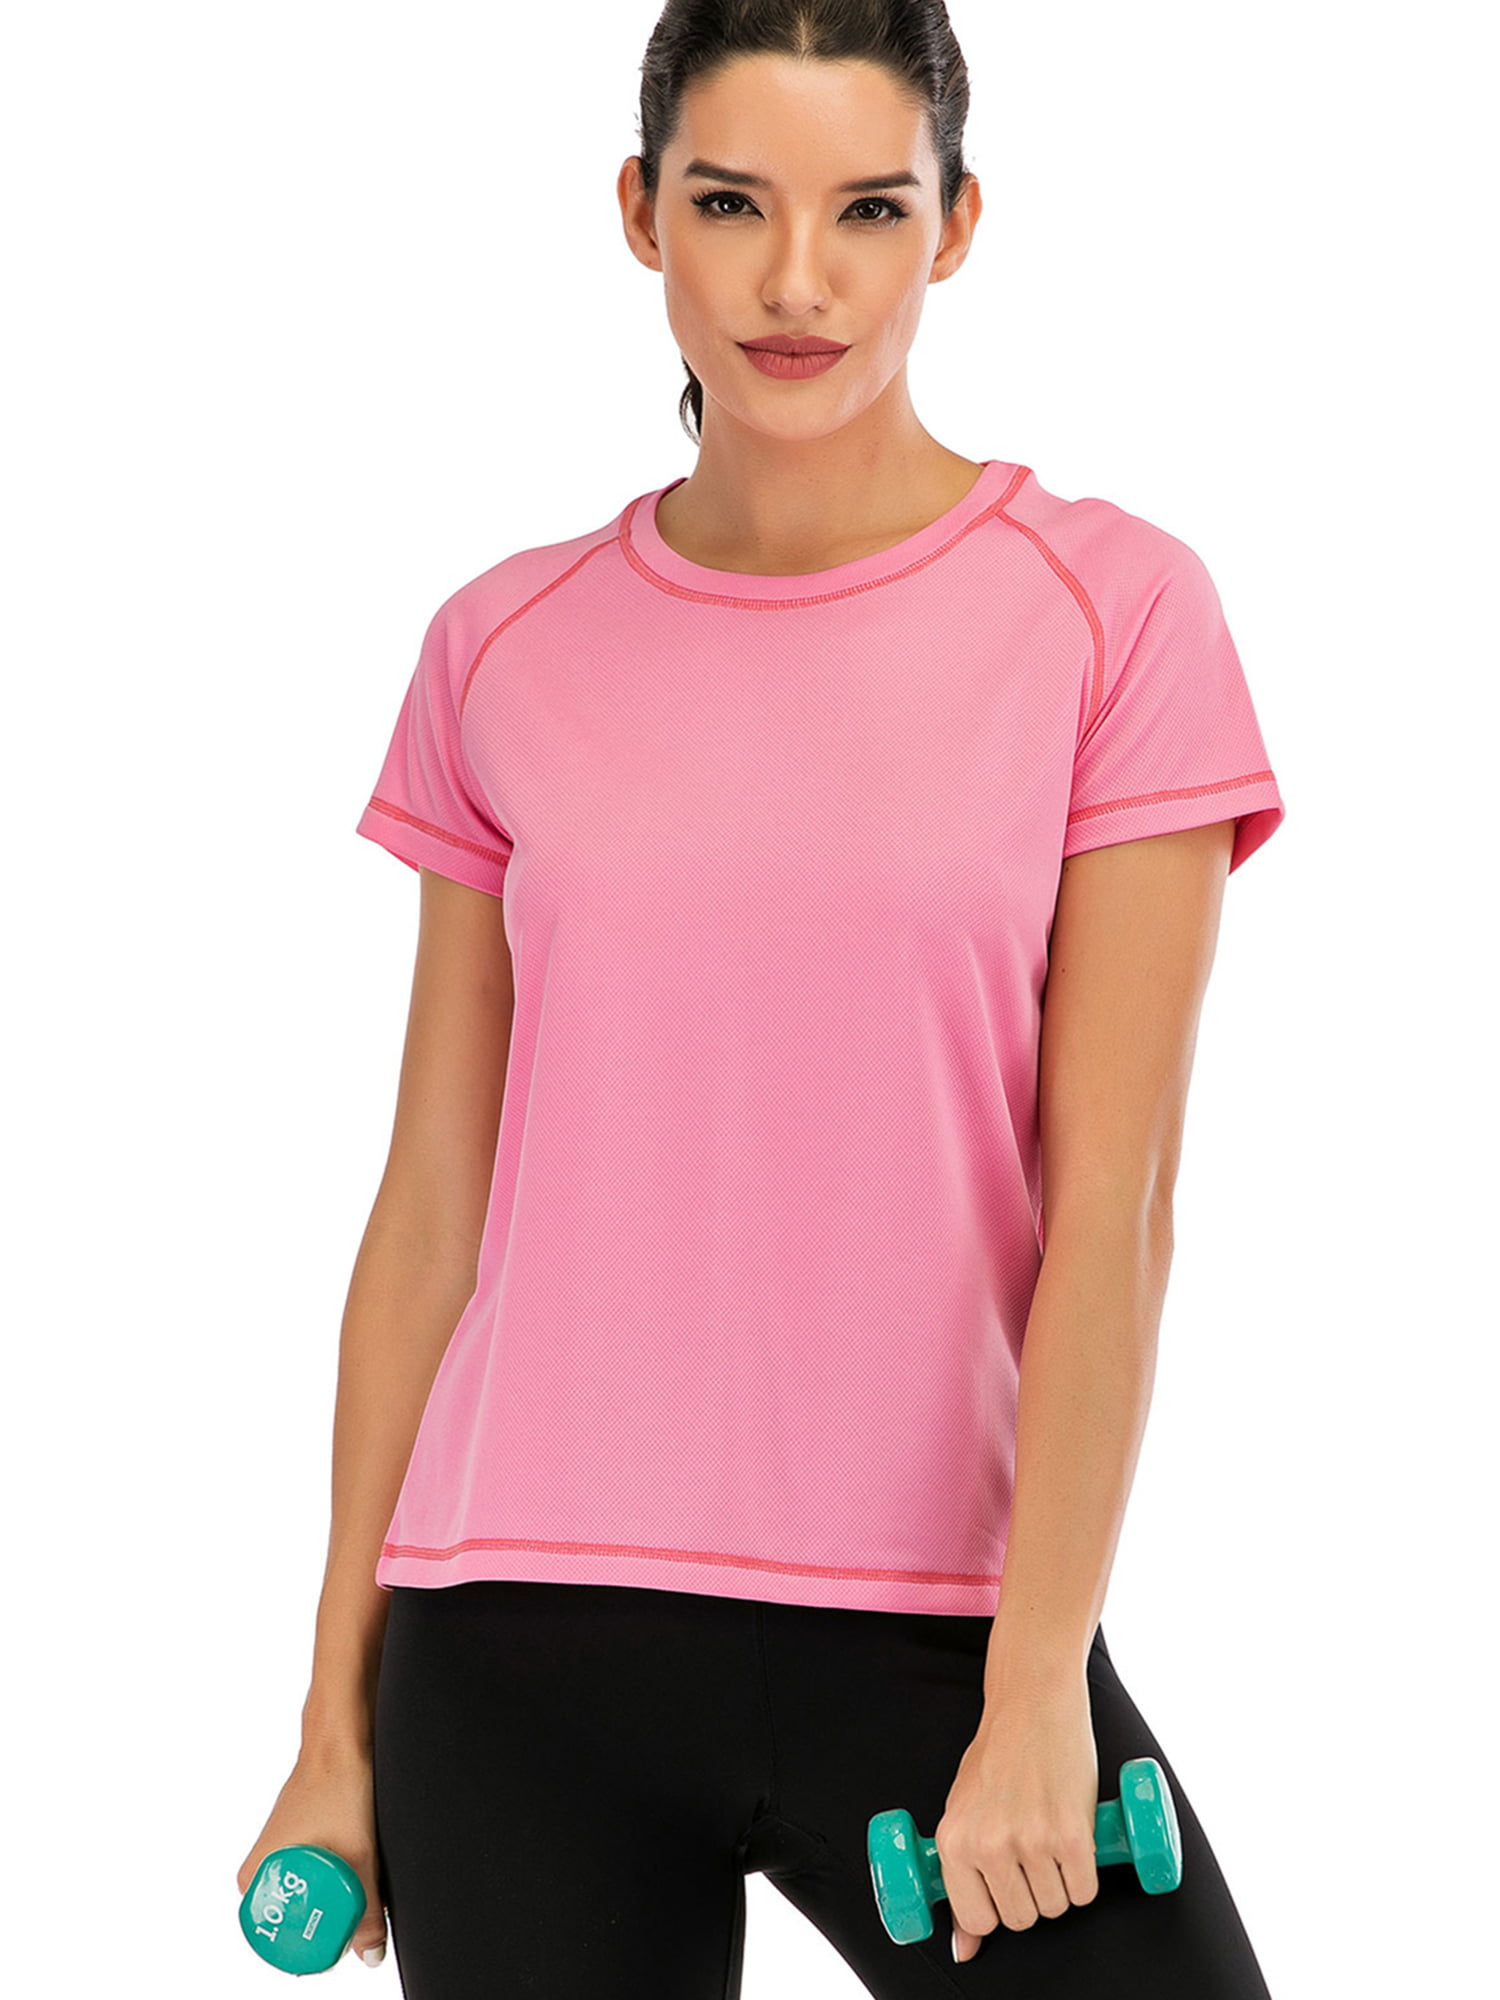 Pandaie Sports Solid Color Short Sleeve Shirts for Women Breathable Quick Dry Casual Daily Work Out Fitness Tops Blouse 